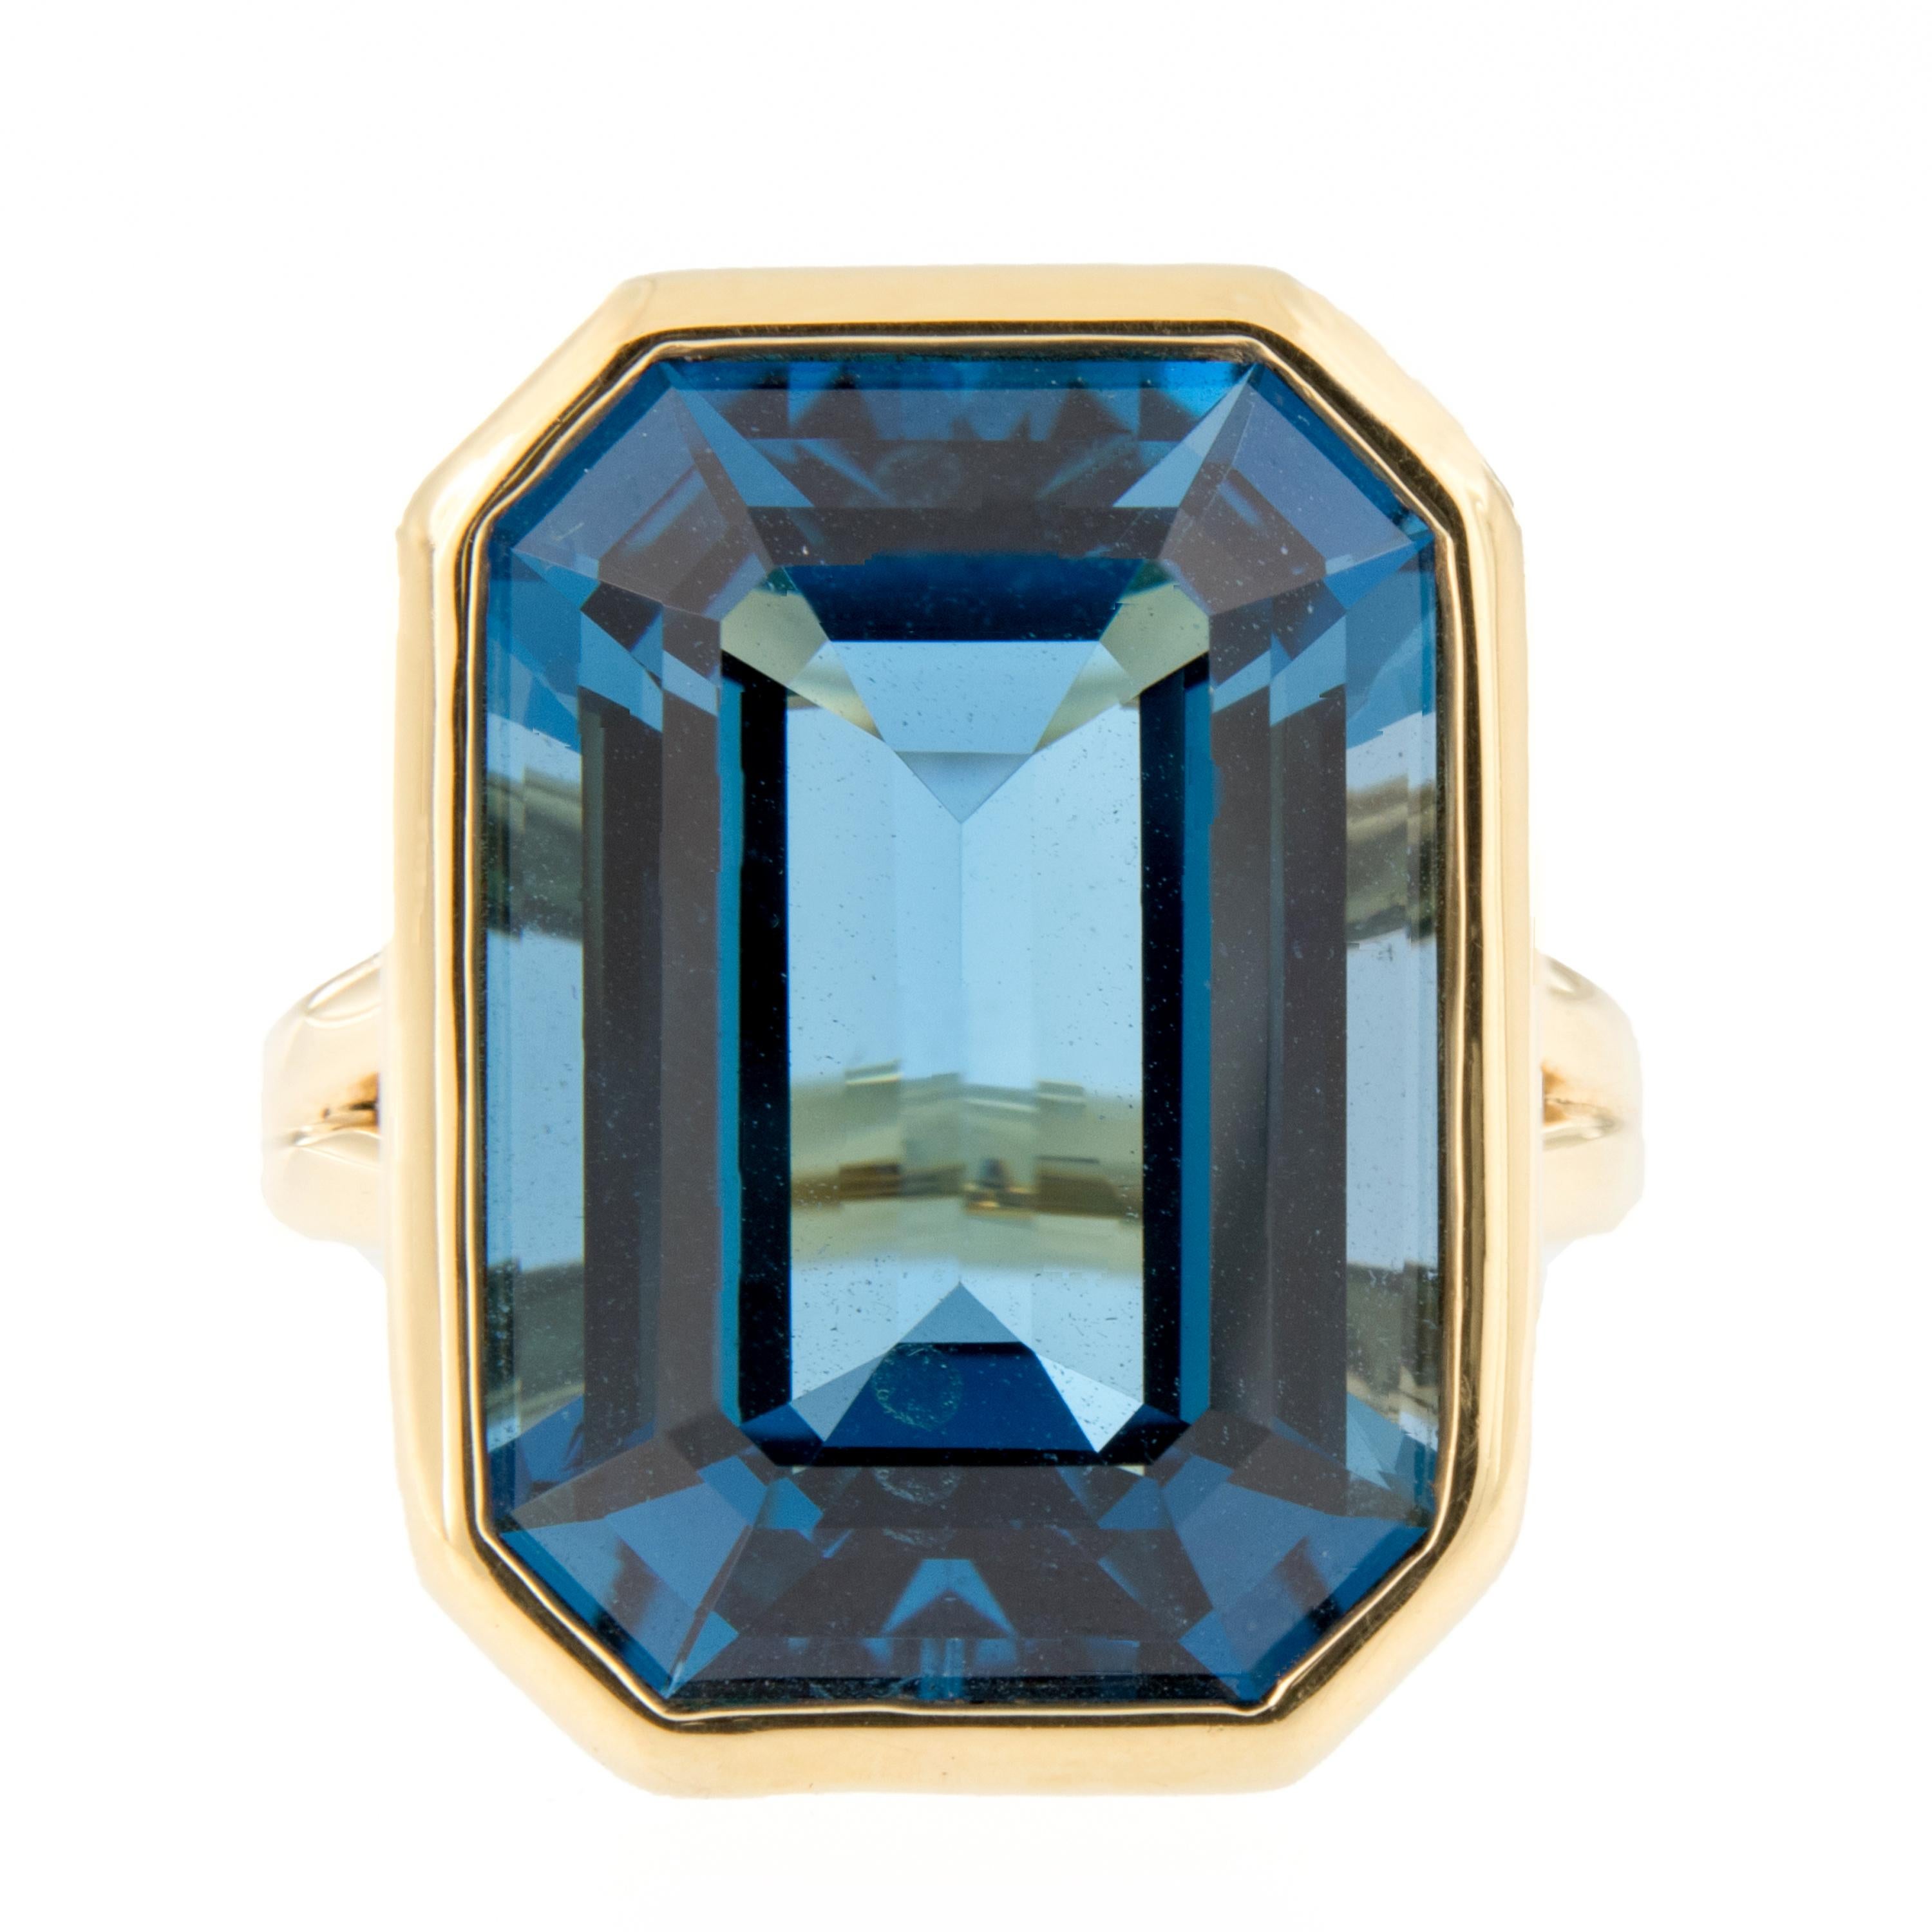 Stunning statement cocktail ring showcases a 24 carat London blue topaz beautifully bezel set in 18k yellow gold. Ring is from the Gossip Collection designed by Goshwara of New York. Ring size 7. Tope of ring measures 17mm x 23mm. Marked